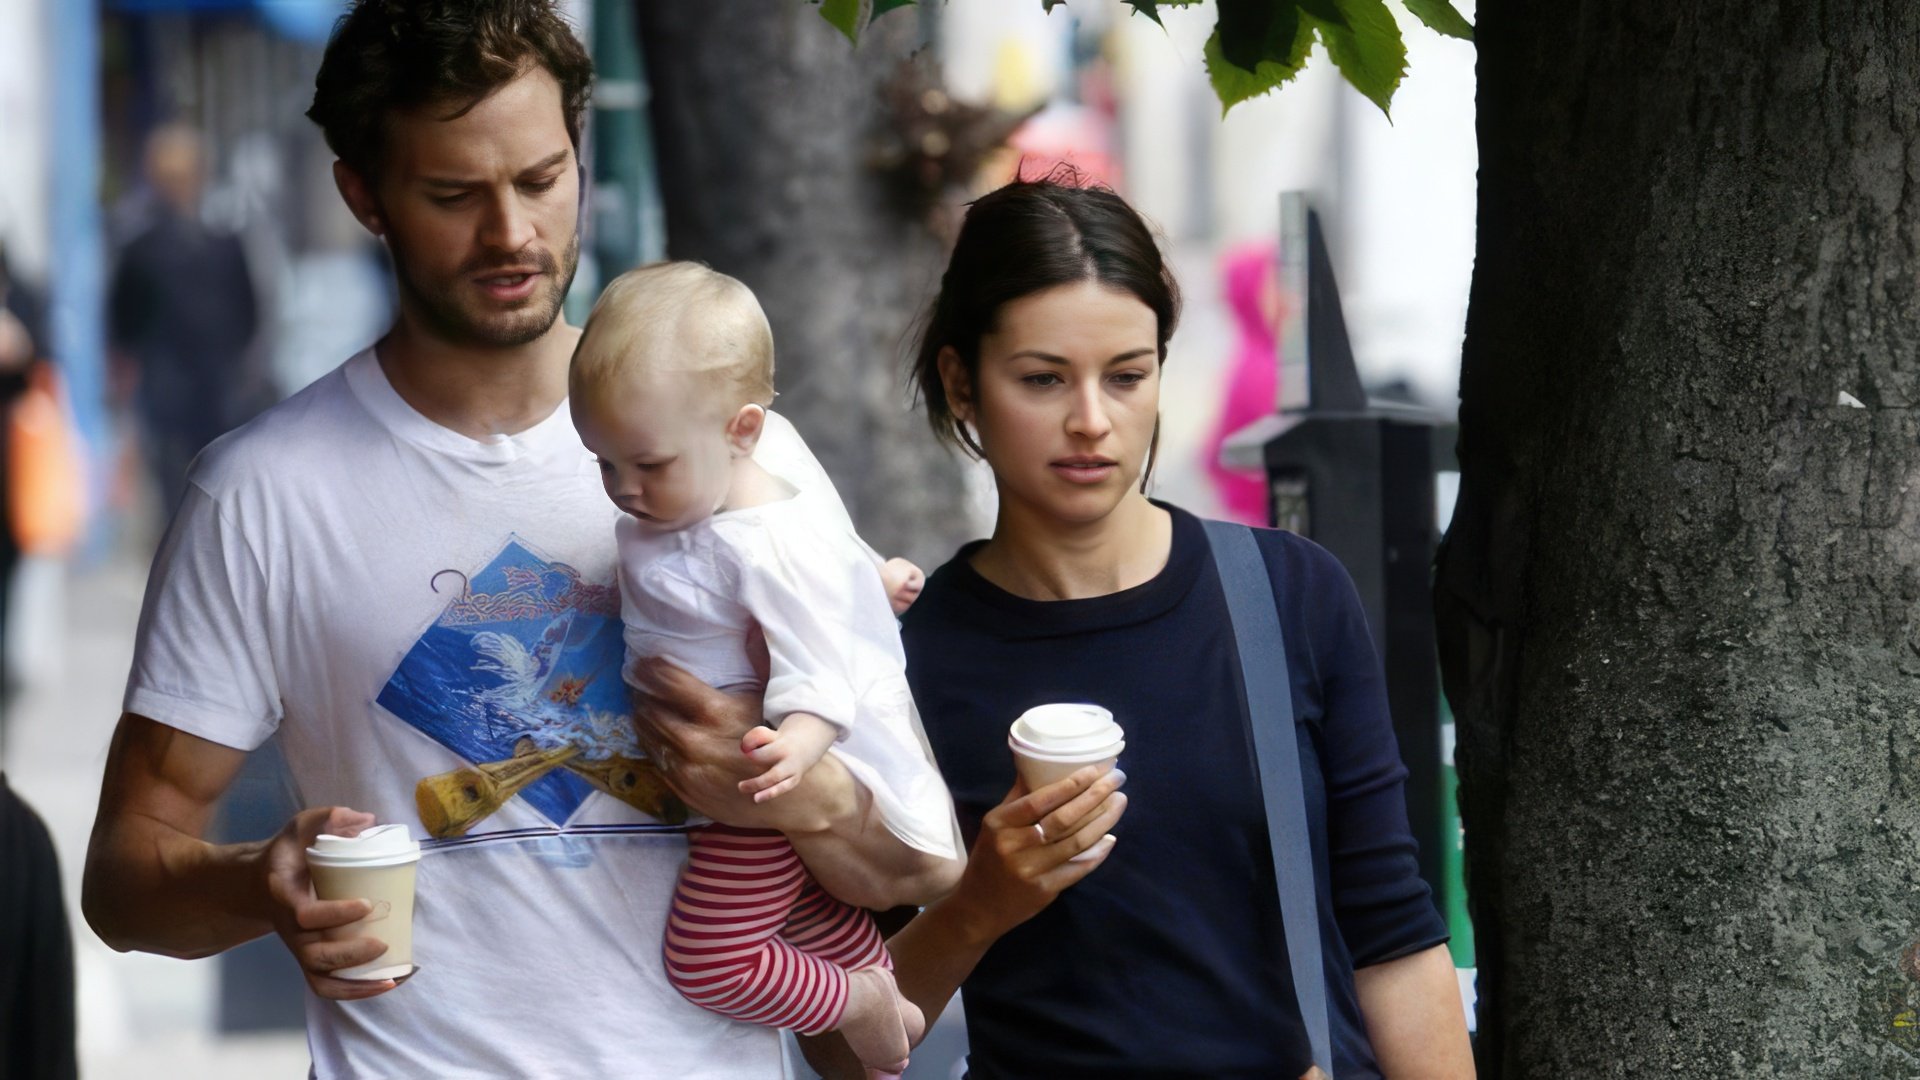 Jamie Dornan, his wife, and child